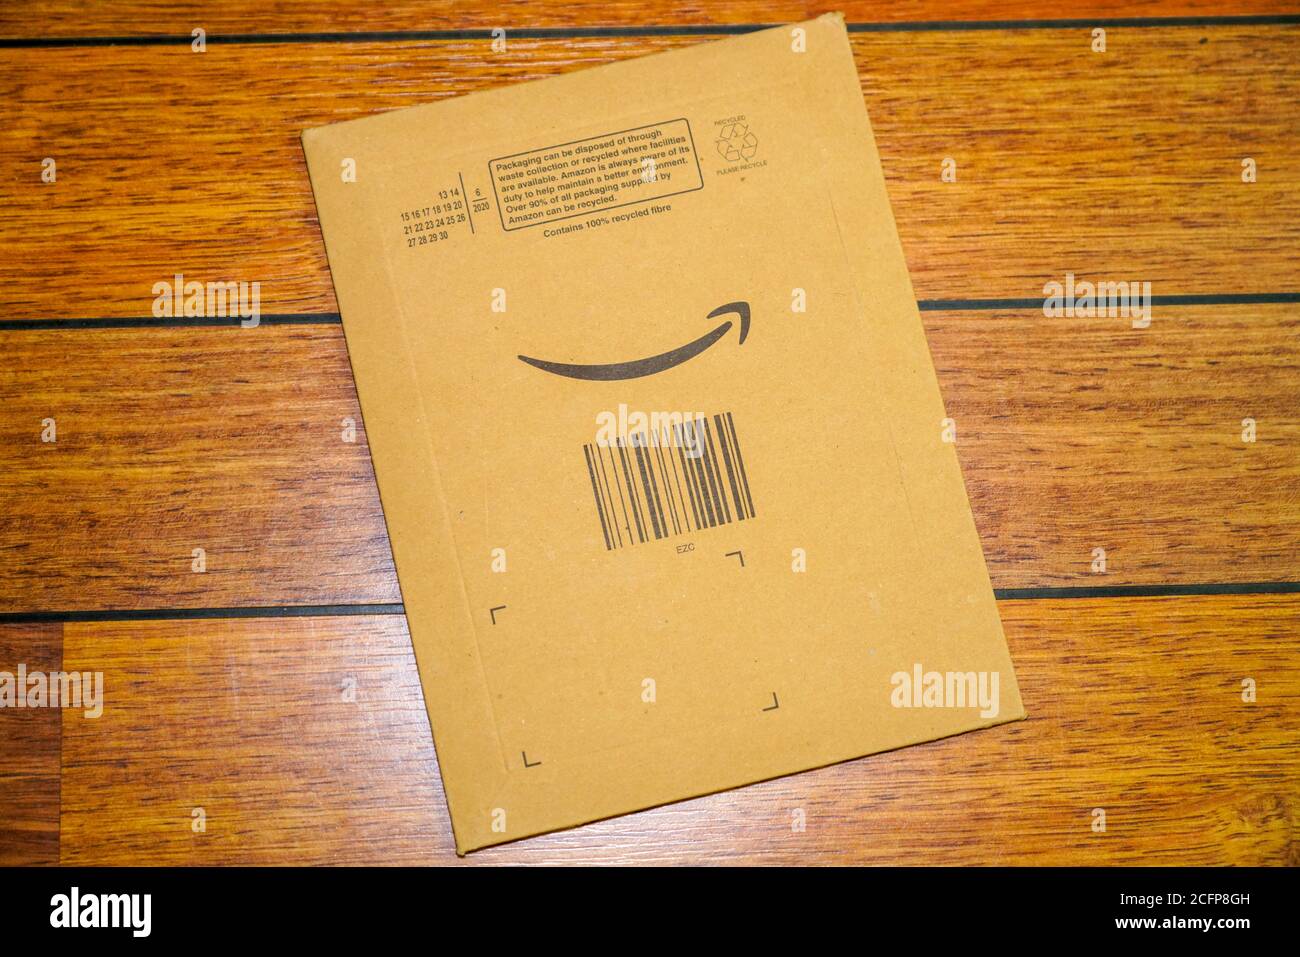 Amazon Envelope High Resolution Stock Photography and Images - Alamy